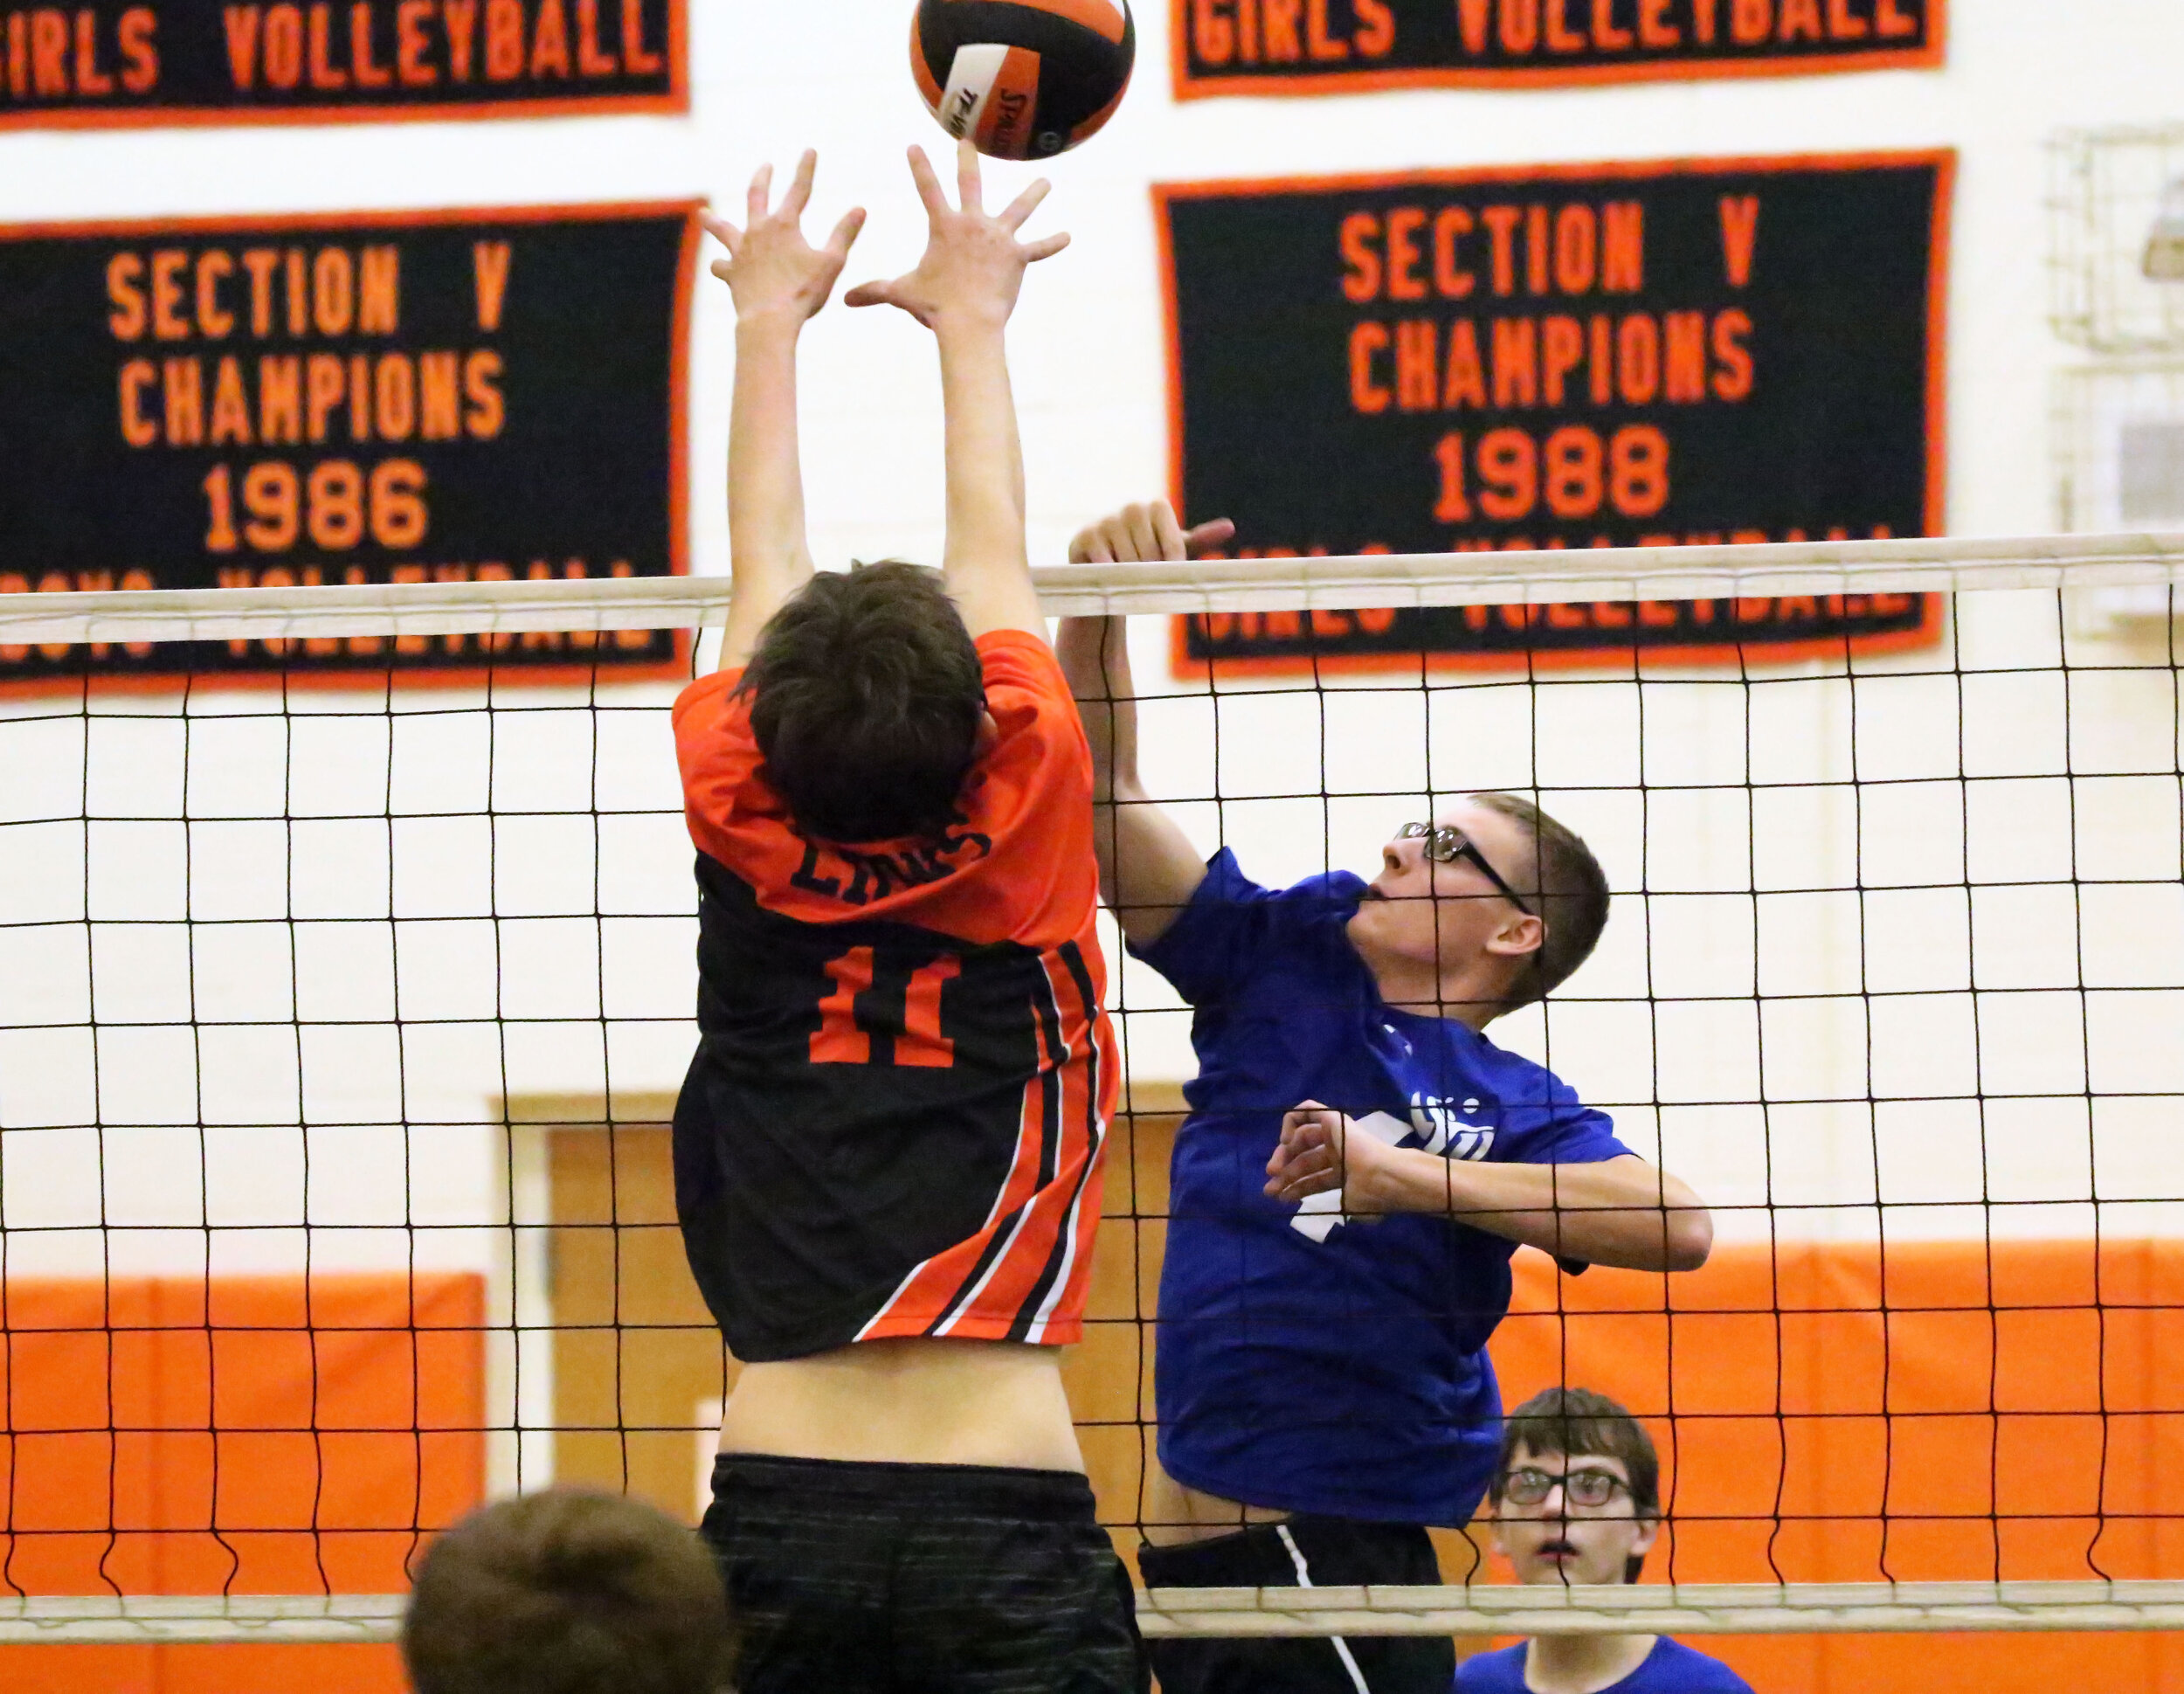  Cuba-Rushford’s Joey Frederick, off-center, goes up to return the ball to the Lions, as Wellsville’s Walker Waldon (11) leaps up for the block during Thursday night’s clash in Wellsville. [Chris Brooks/WellsvilleSports.com] 